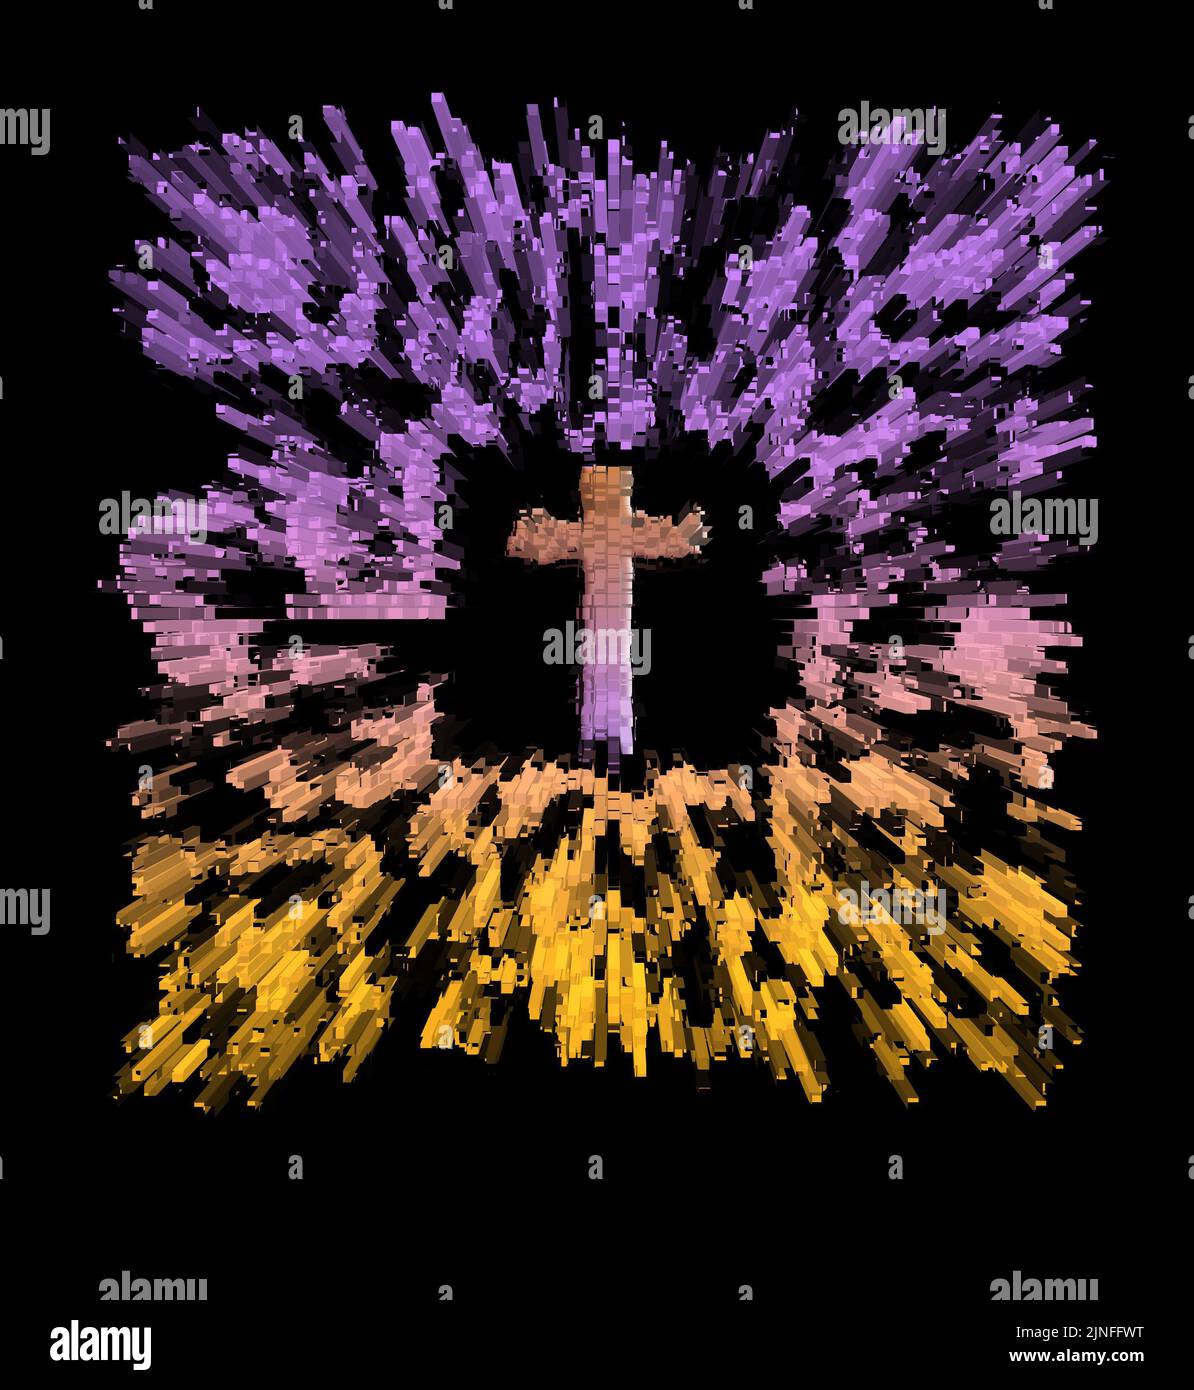 A Chrisitian cross is seen in a 3-d illustration. Stock Photo